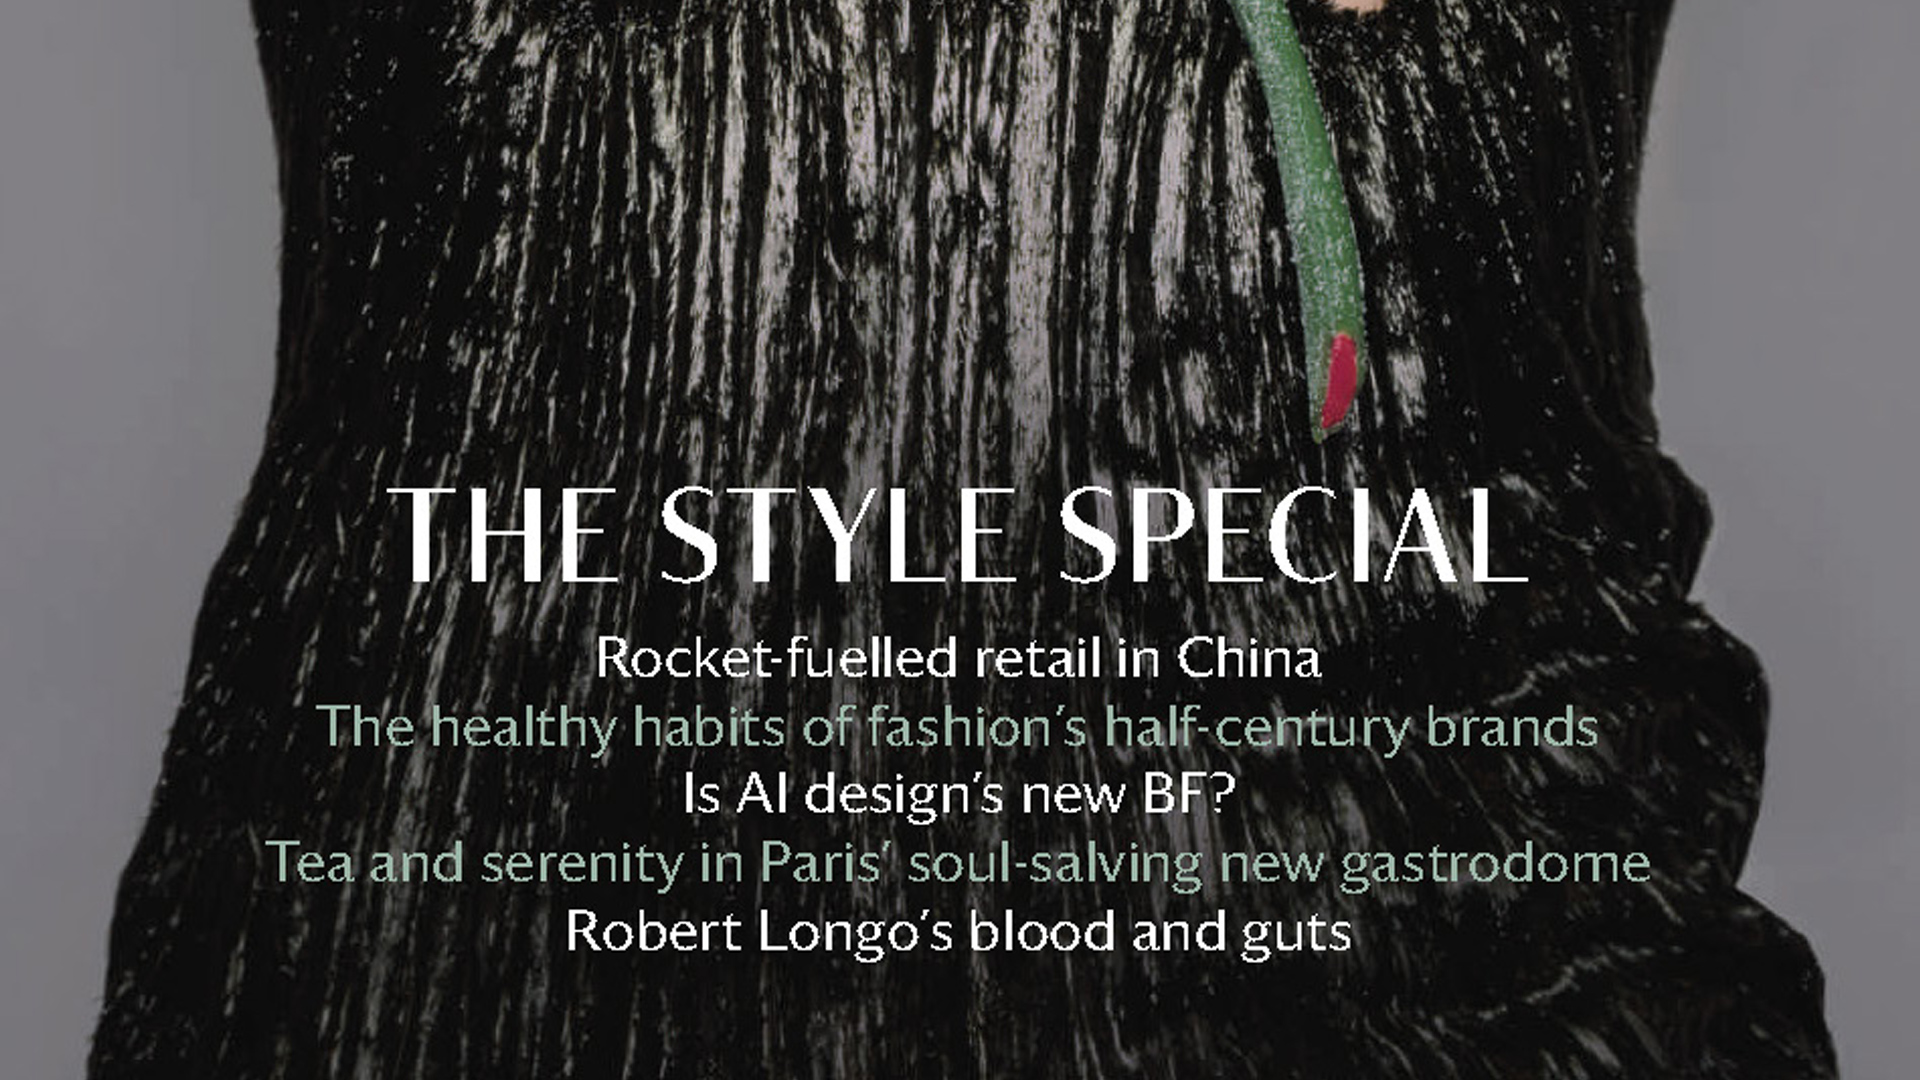 Wallpaper* - Rocket fuelled retail in China - Sybarite